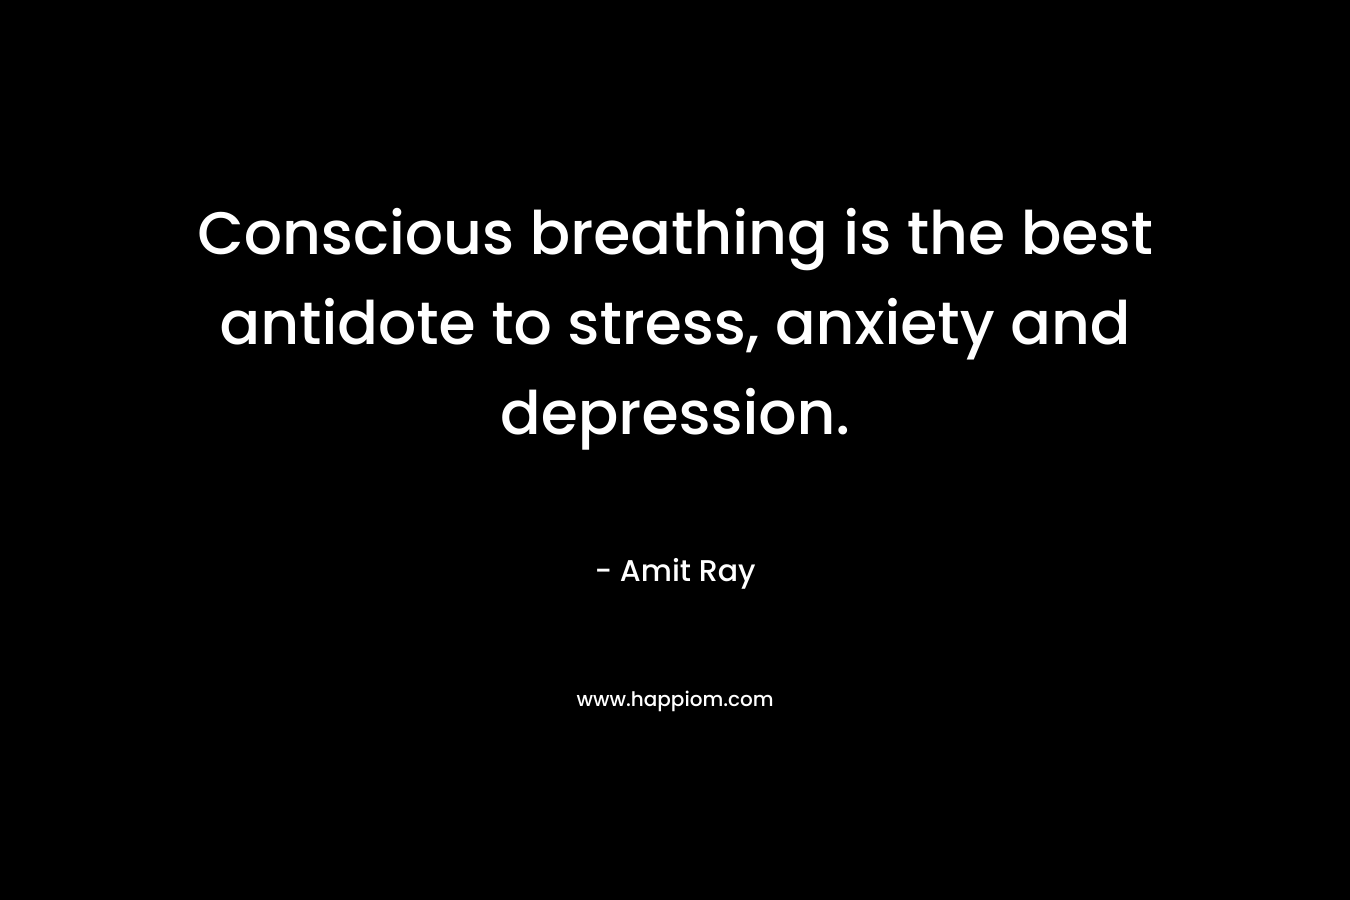 Conscious breathing is the best antidote to stress, anxiety and depression.